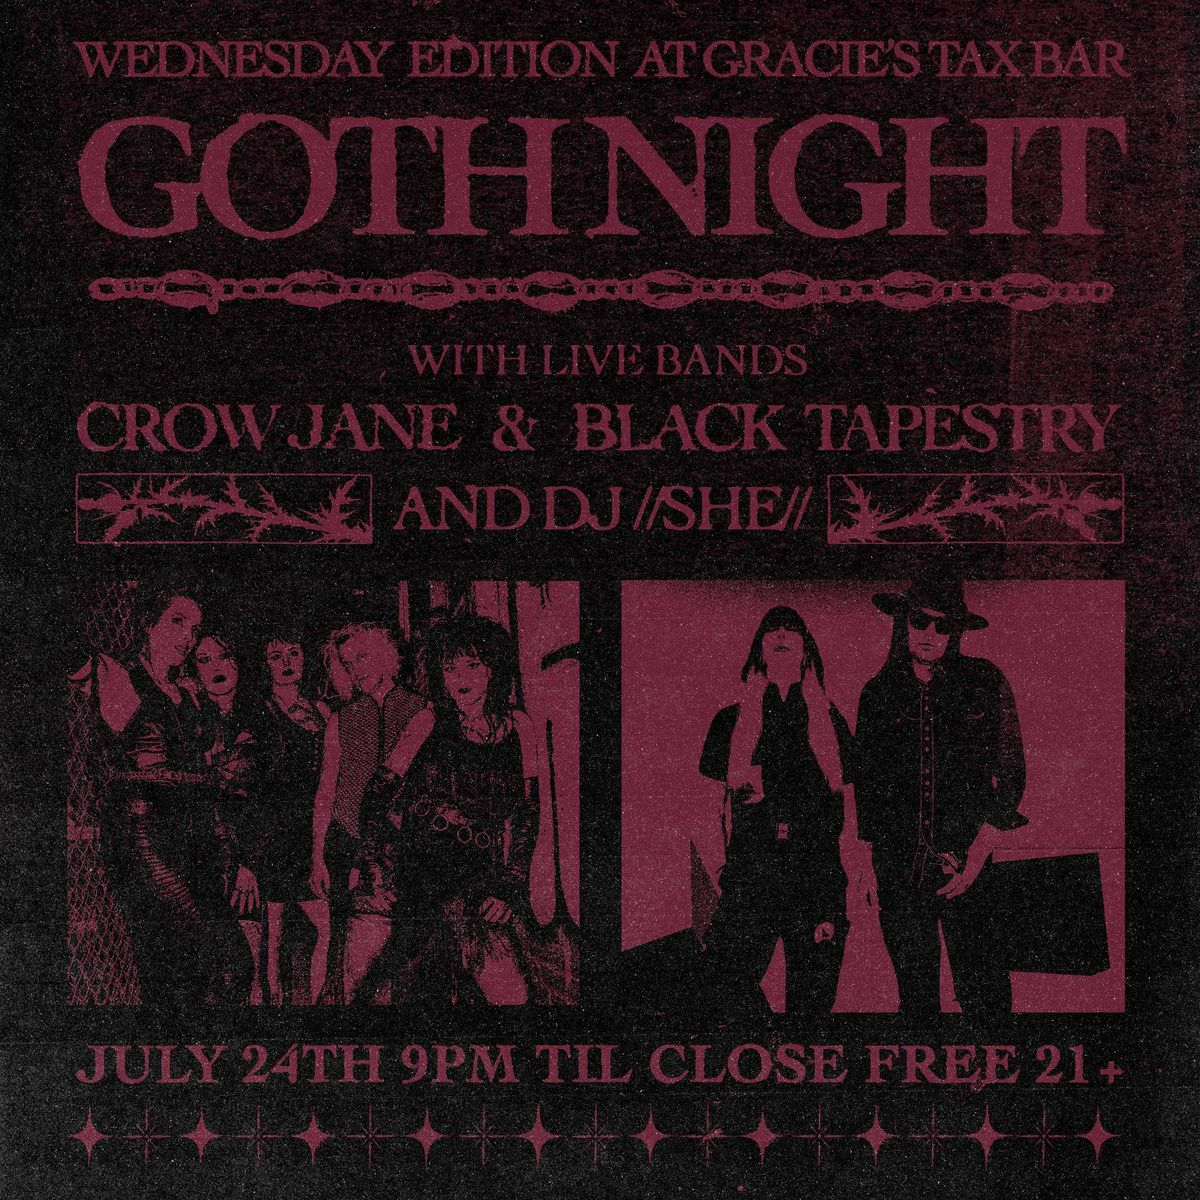 Goth Night with Live Bands! Crow Jane & Black Tapestry